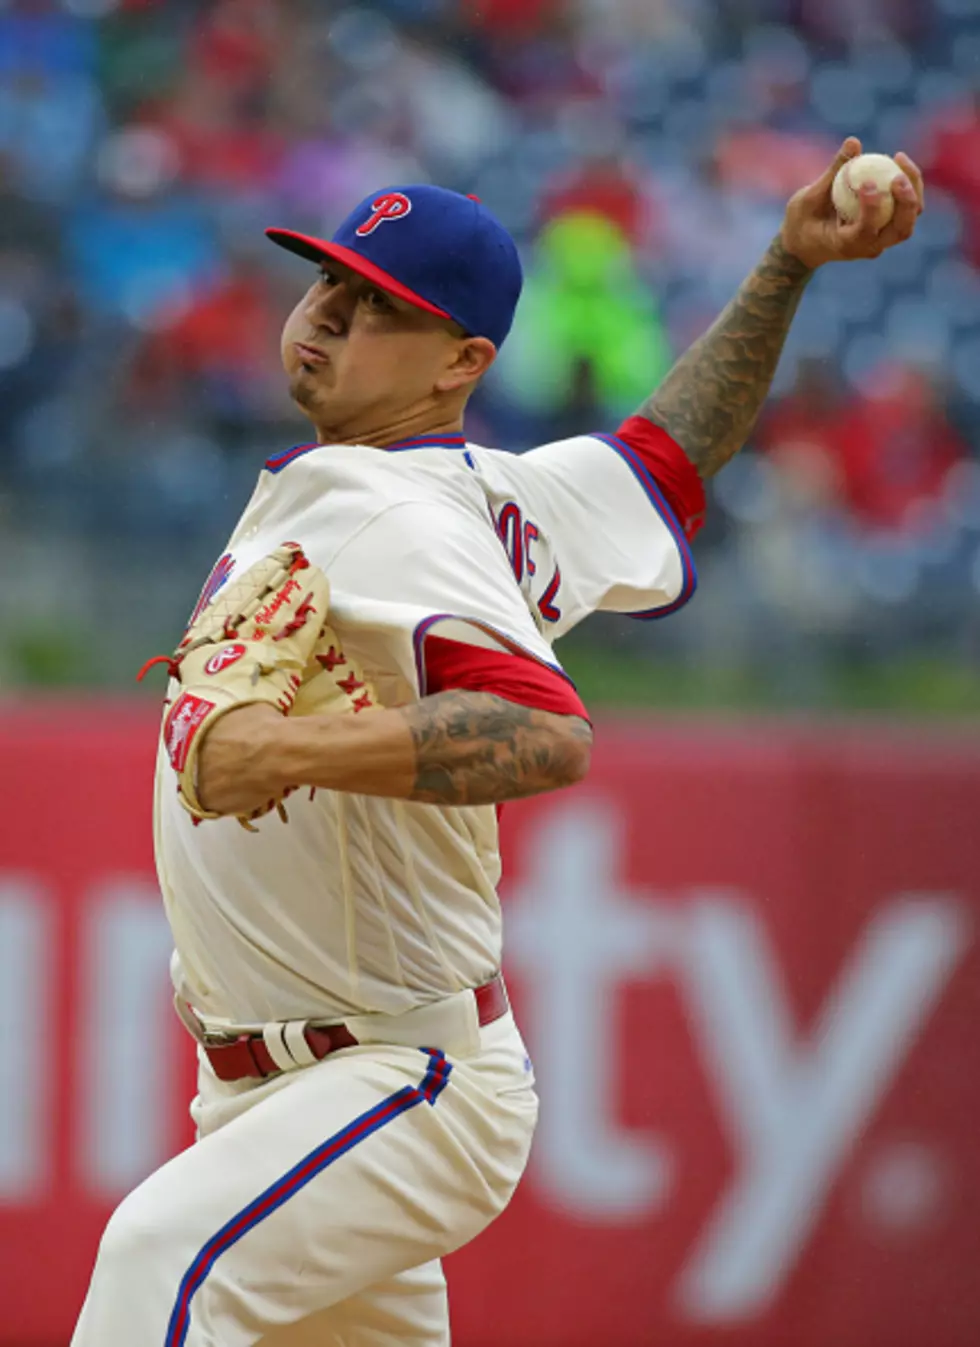 Is Vince Velasquez A Starting Pitcher Or Closer?